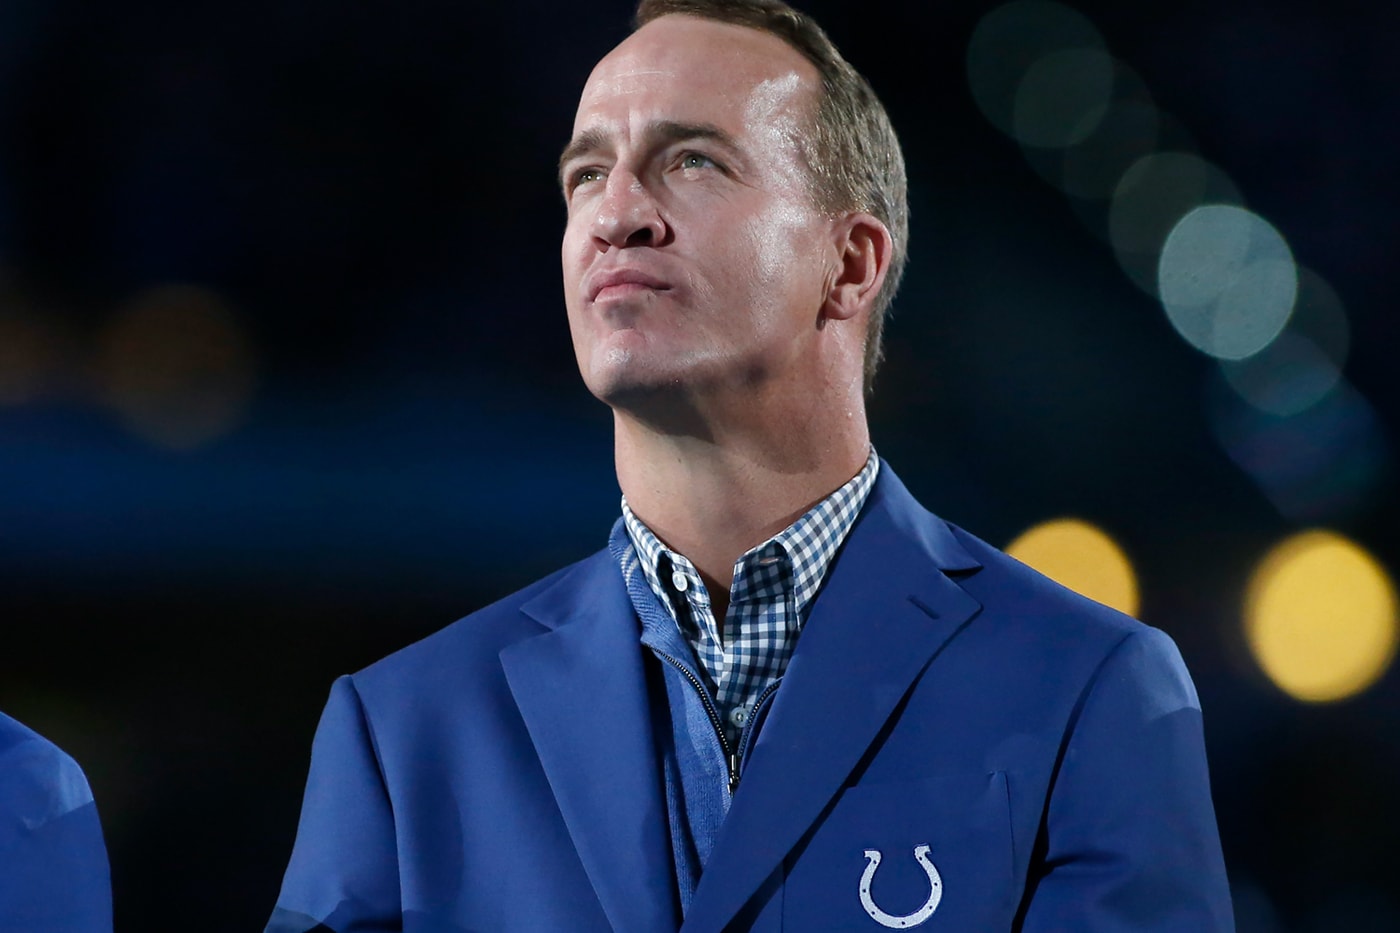 Peyton Manning Joins Pro Football Hall of Fame NFL American Football Denver Broncos Indiana Colts Aaron Rodgers Green Bay Packers Tom Brady Super Bowl 50 Quarterback Class of 2021 Pro Bowl Football GOAT